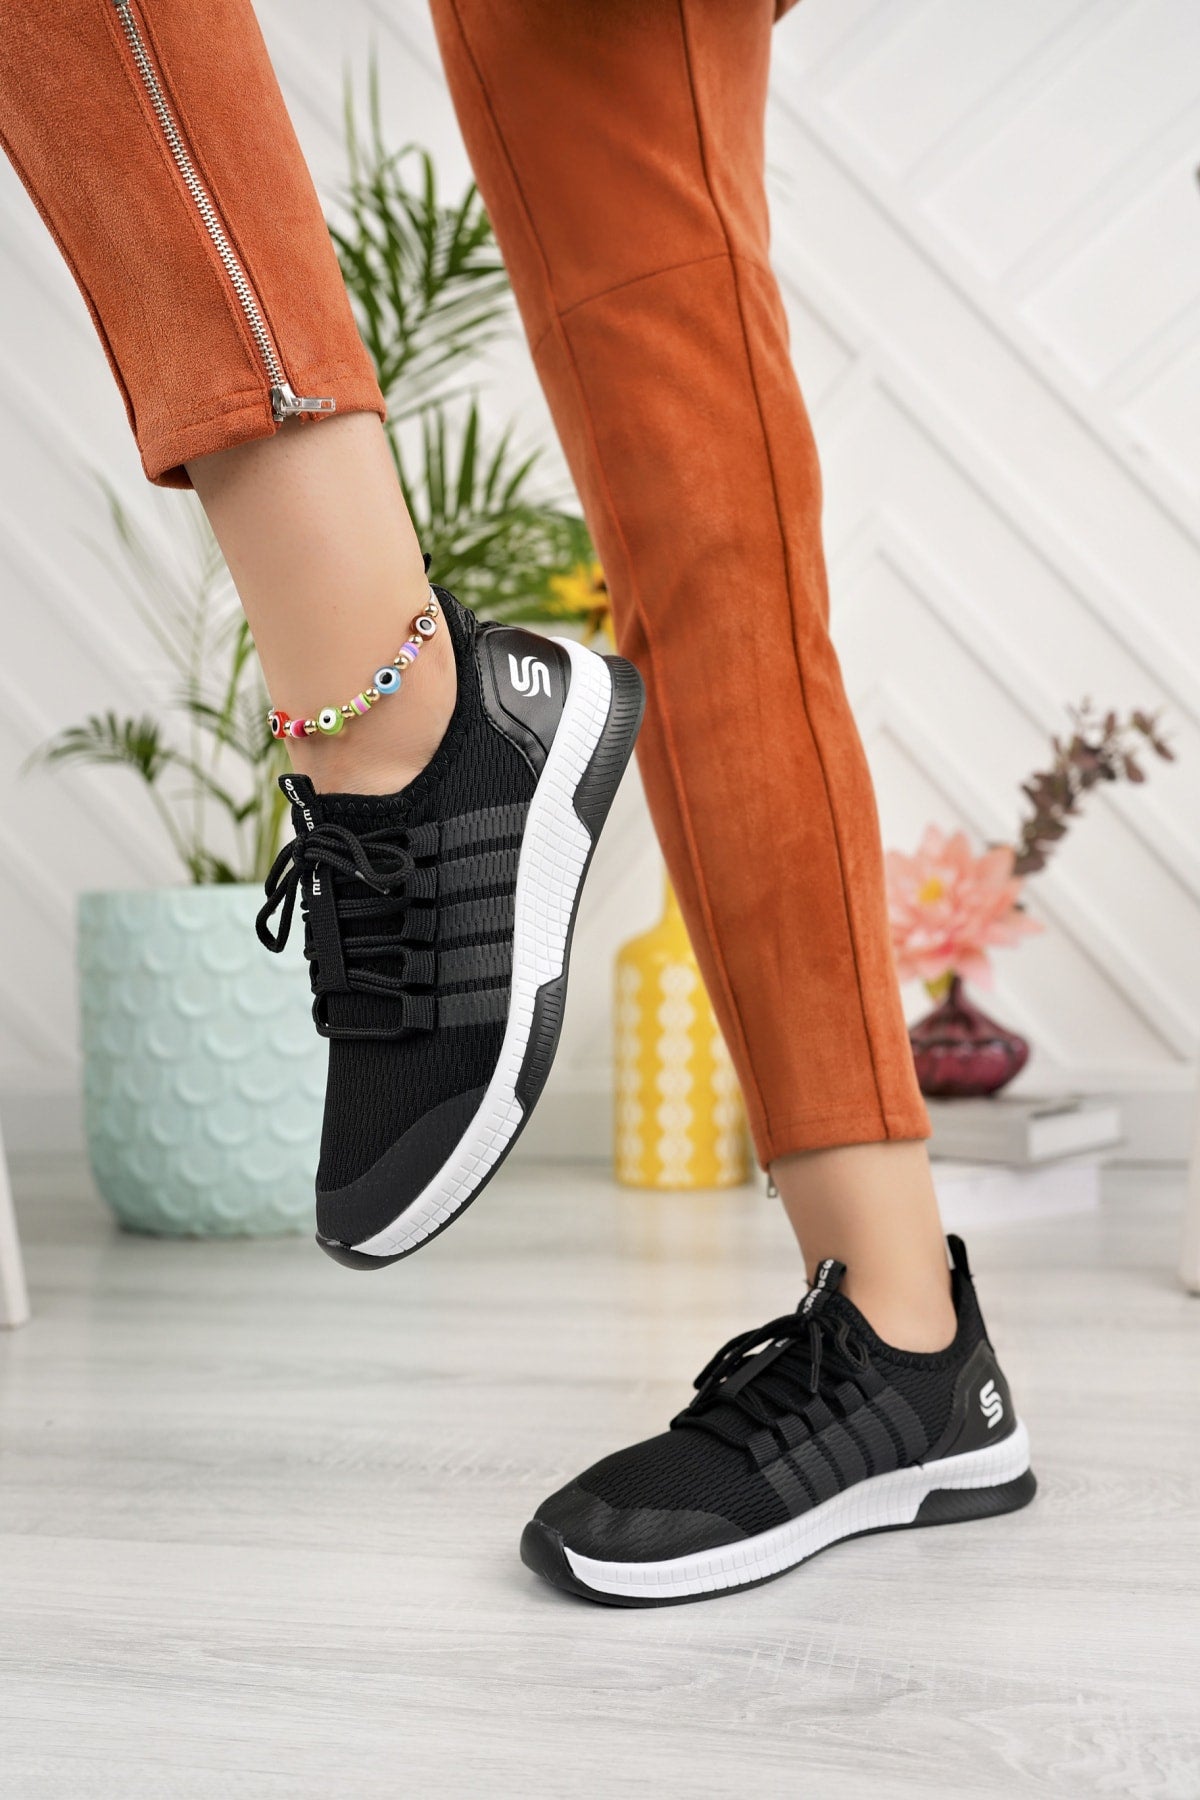 Black - Knitwear Sports Shoes for Daily Use